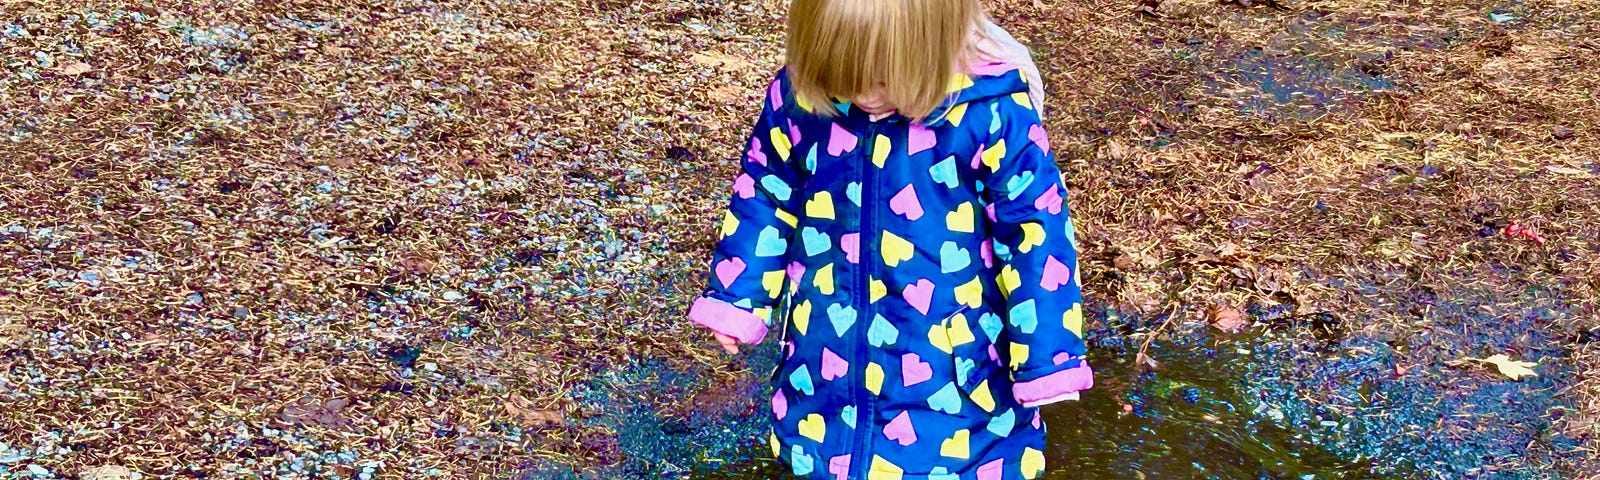 A small child stands in a muddy puddle. She is wearing boots and a rain jacket that is multicoloured.